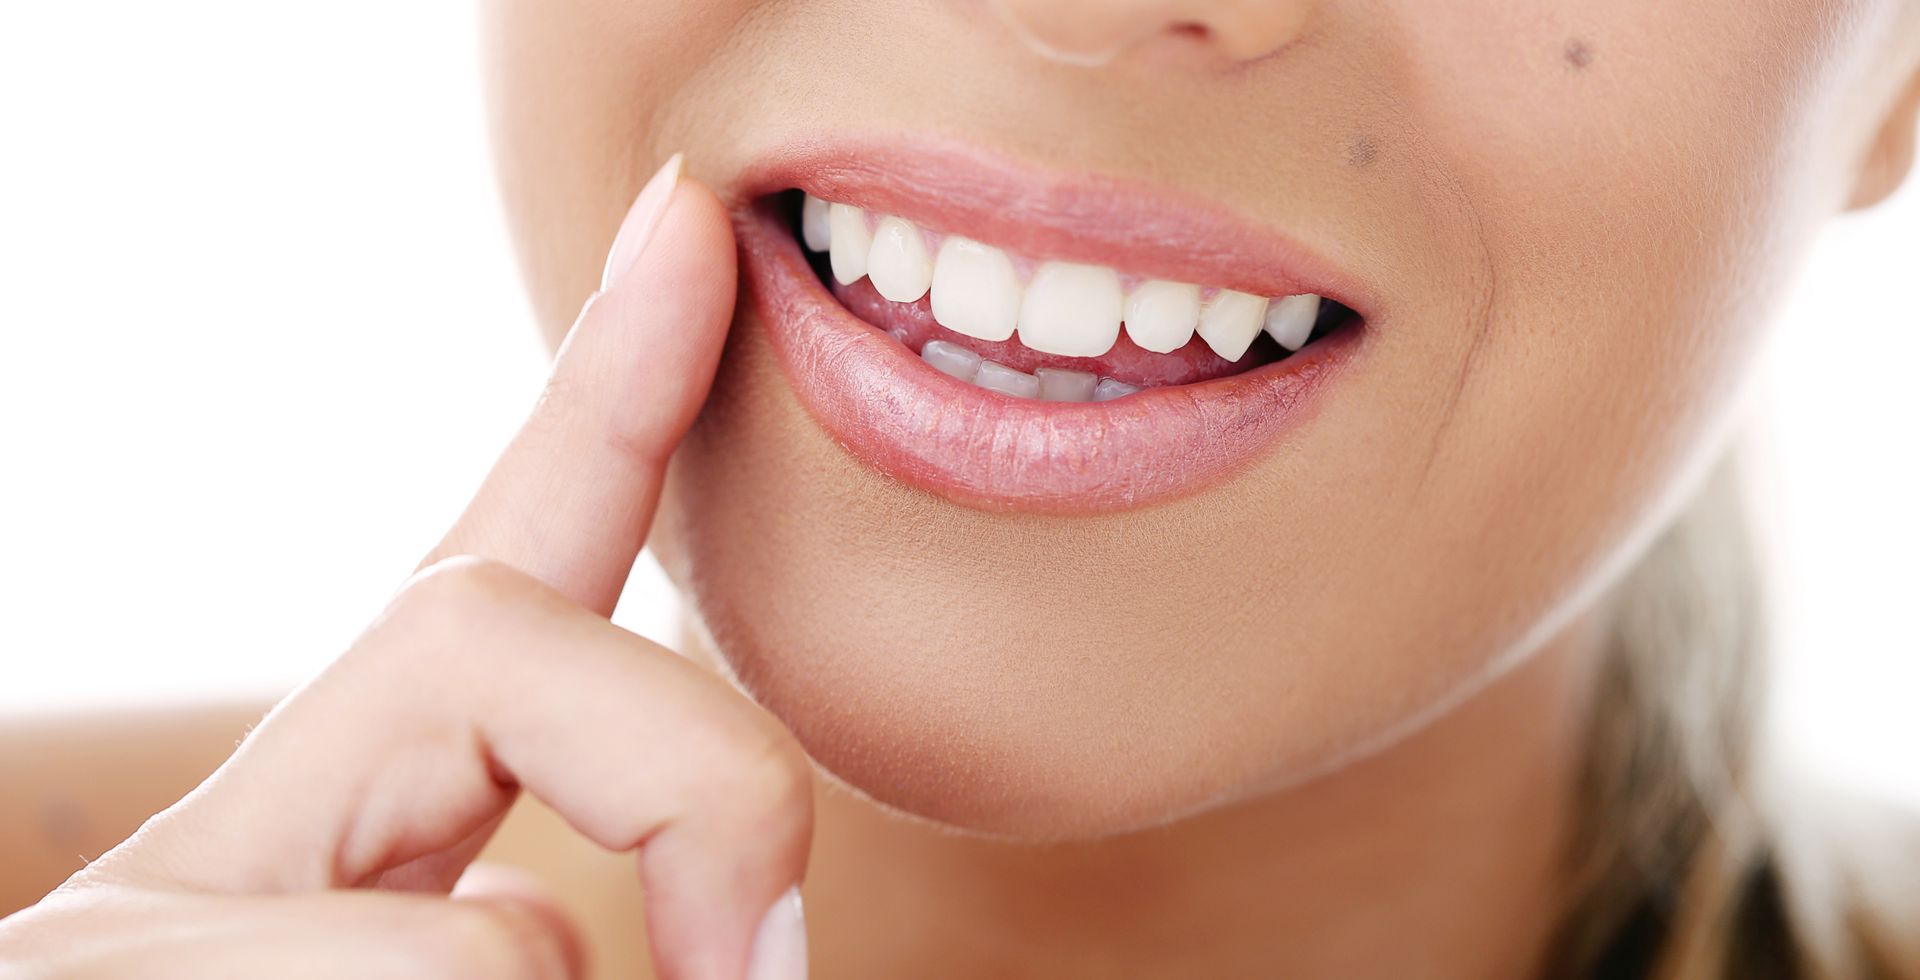 Get a Bright Smile With Our Teeth Whitening Solutions